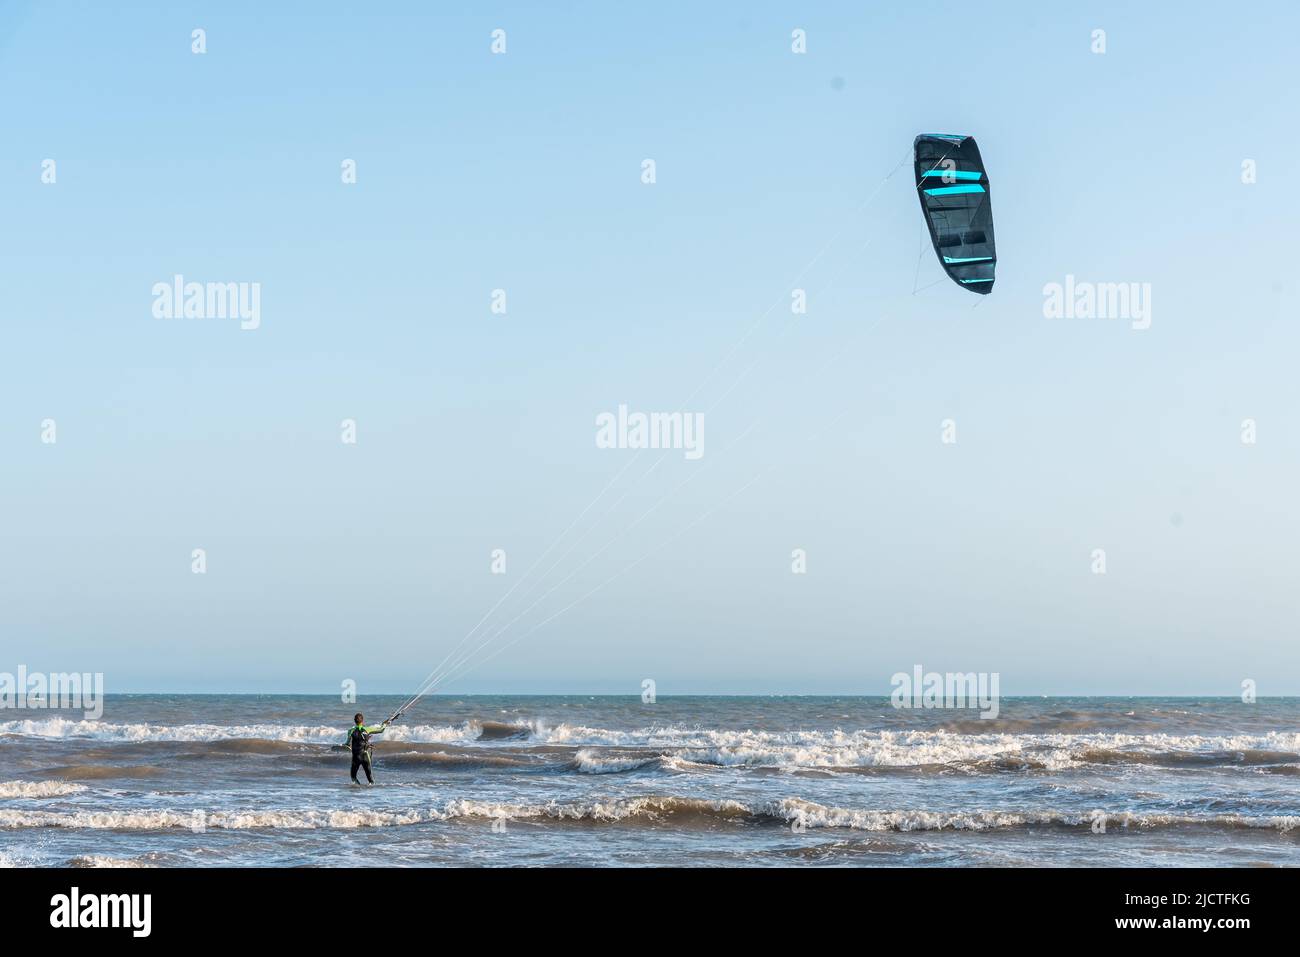 View of an unrecognizable man kitesurfing in the waves with a blue sky. Stock Photo